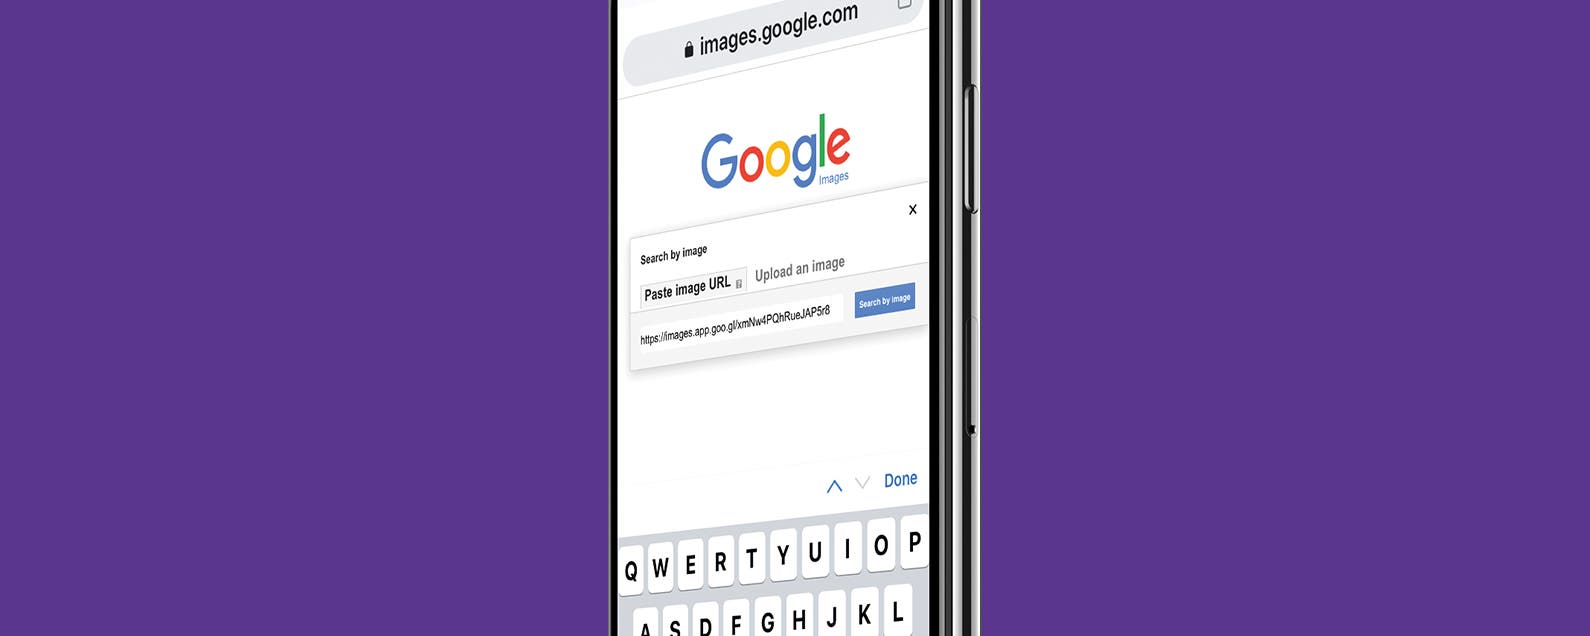 How to Do Reverse Image Search on Your Mobile Phone - Technipages